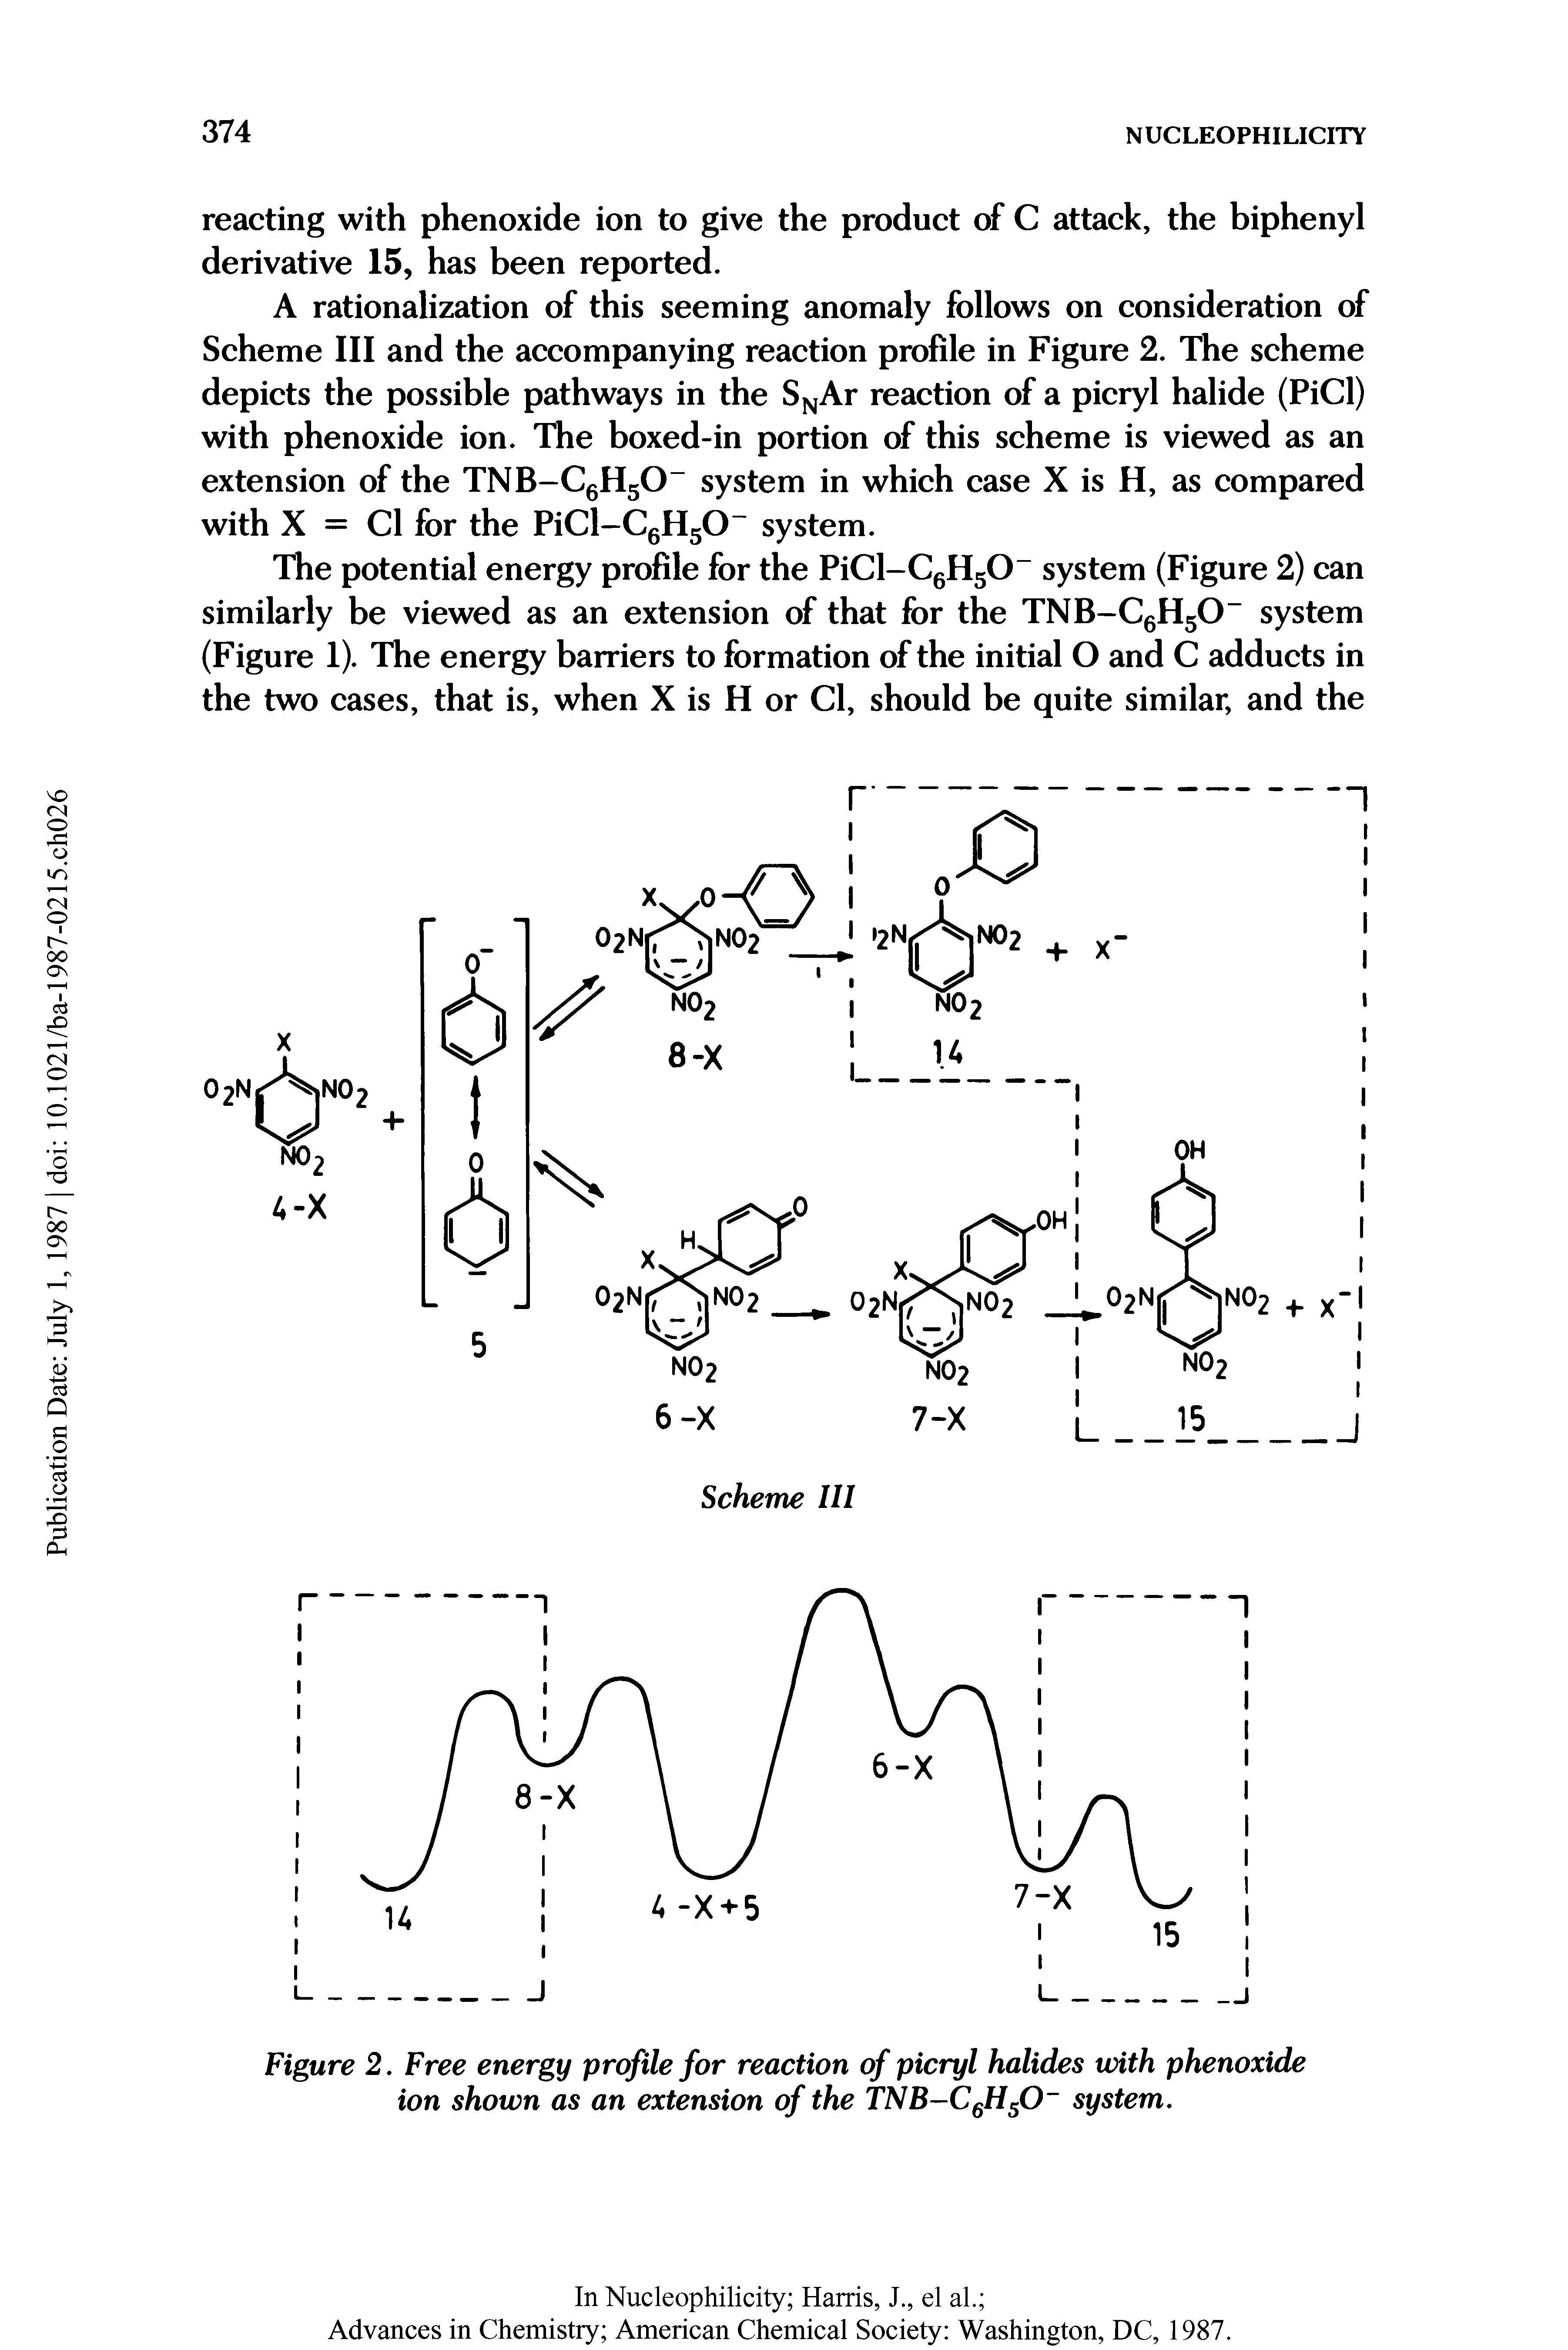 Figure 2. Free energy profile for reaction of picryl halides with phenoxide ion shown as an extension of the TNB-C6HsO system.